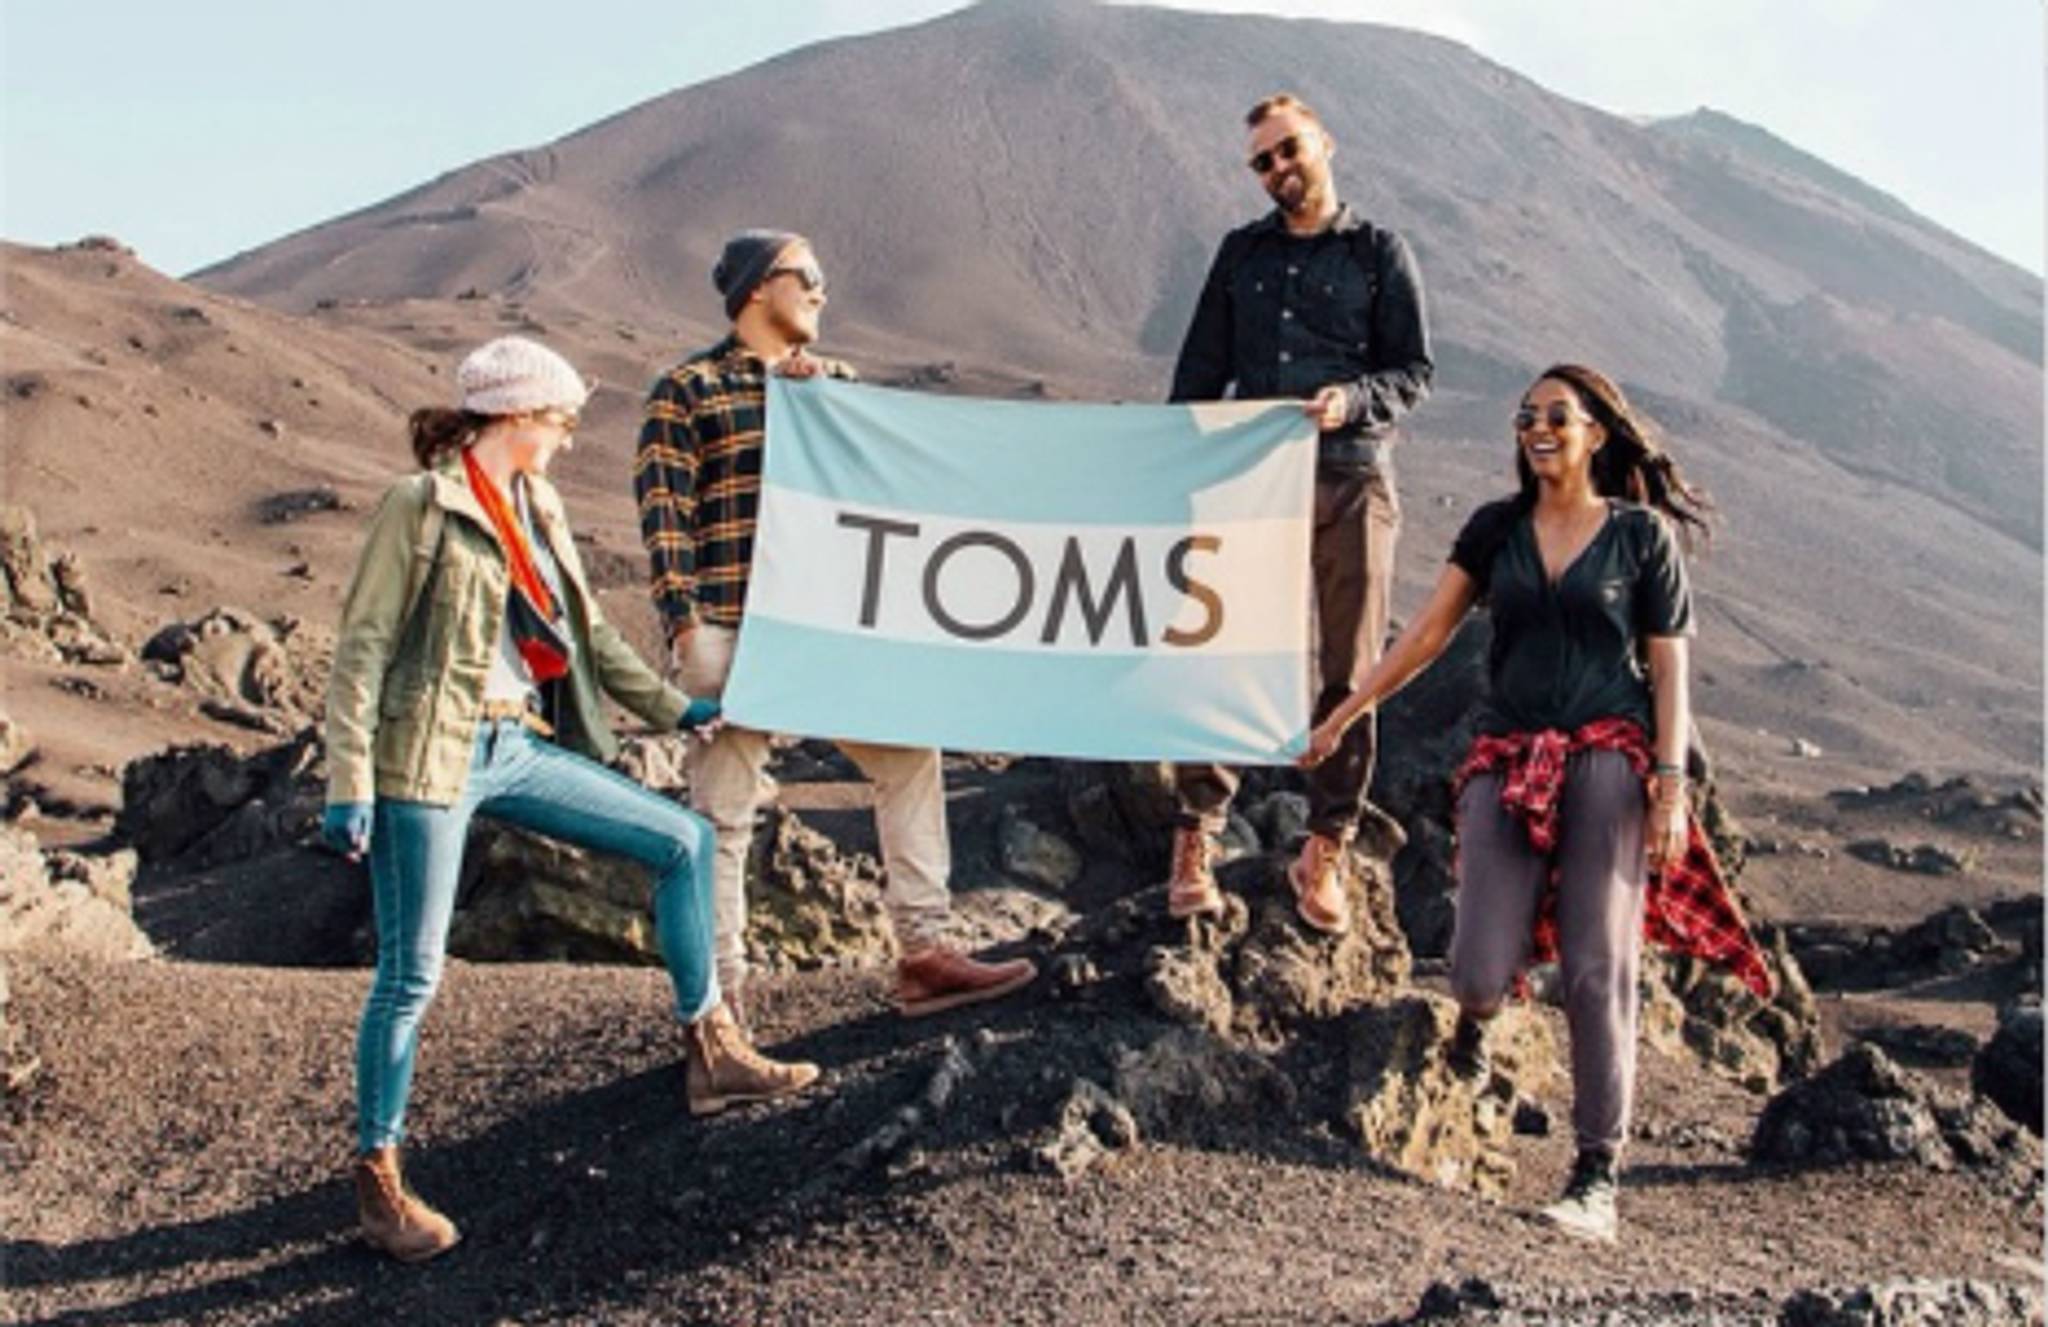 TOMS expands its model to coffee